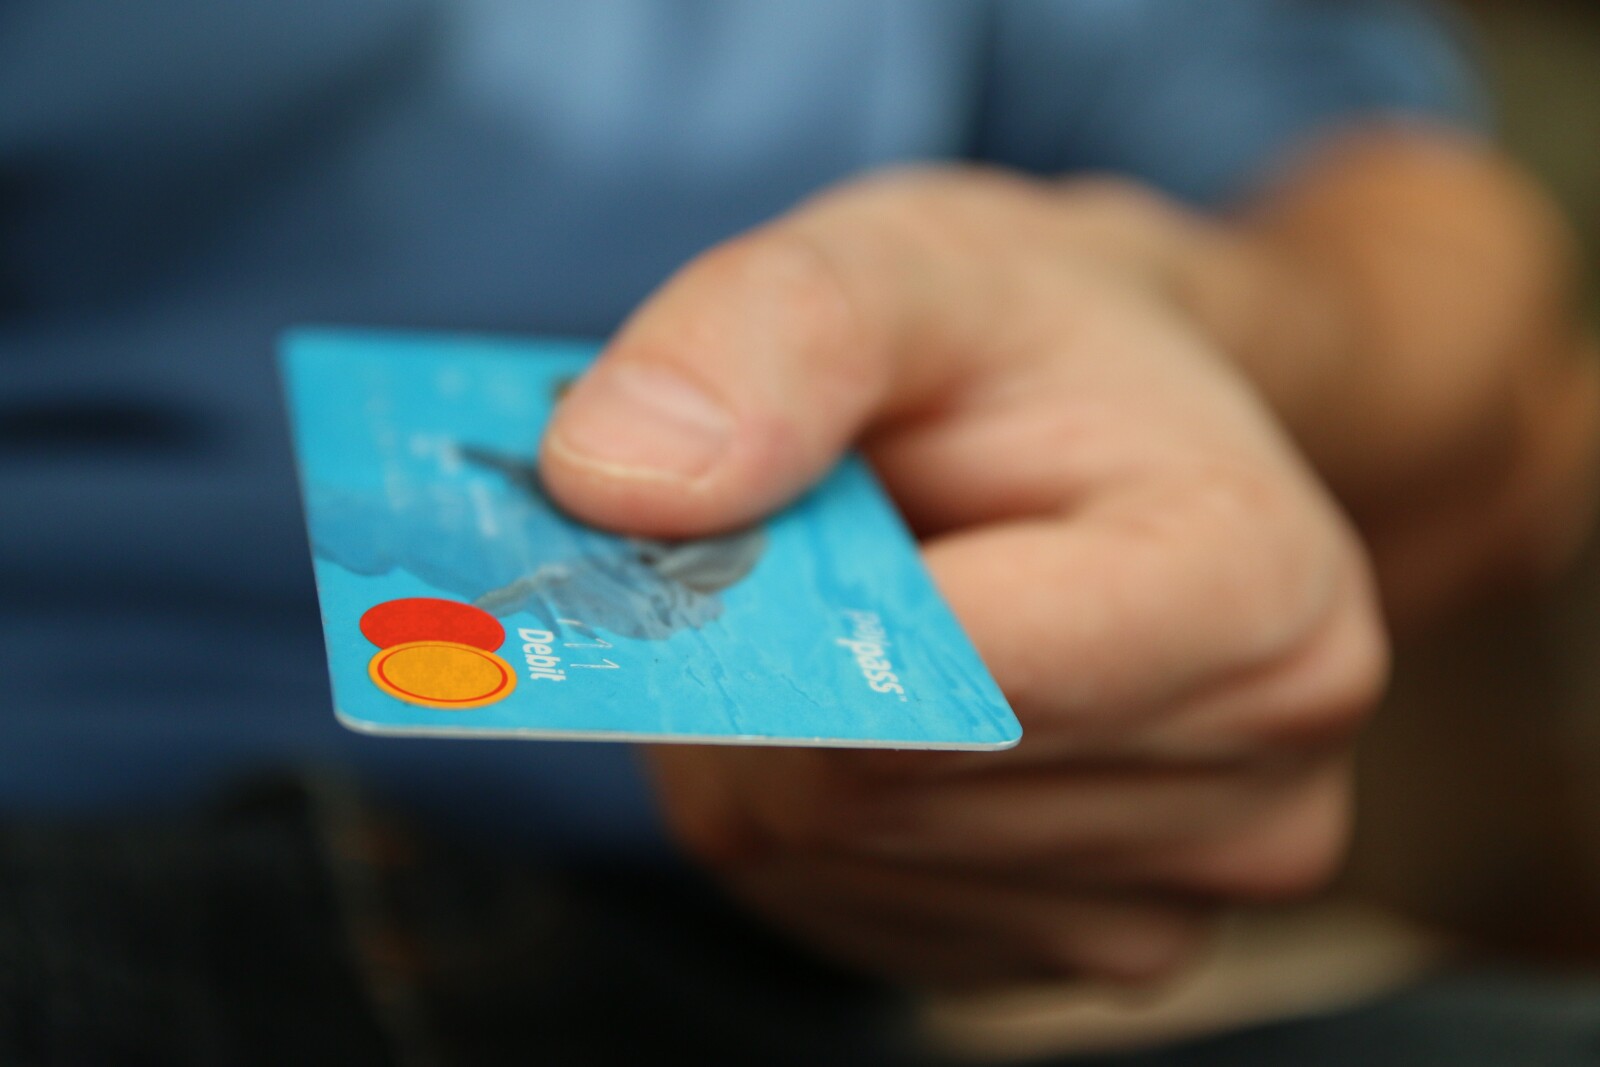 Late Payment Penalties: Understanding the Fine Print on Credit Card Agreements